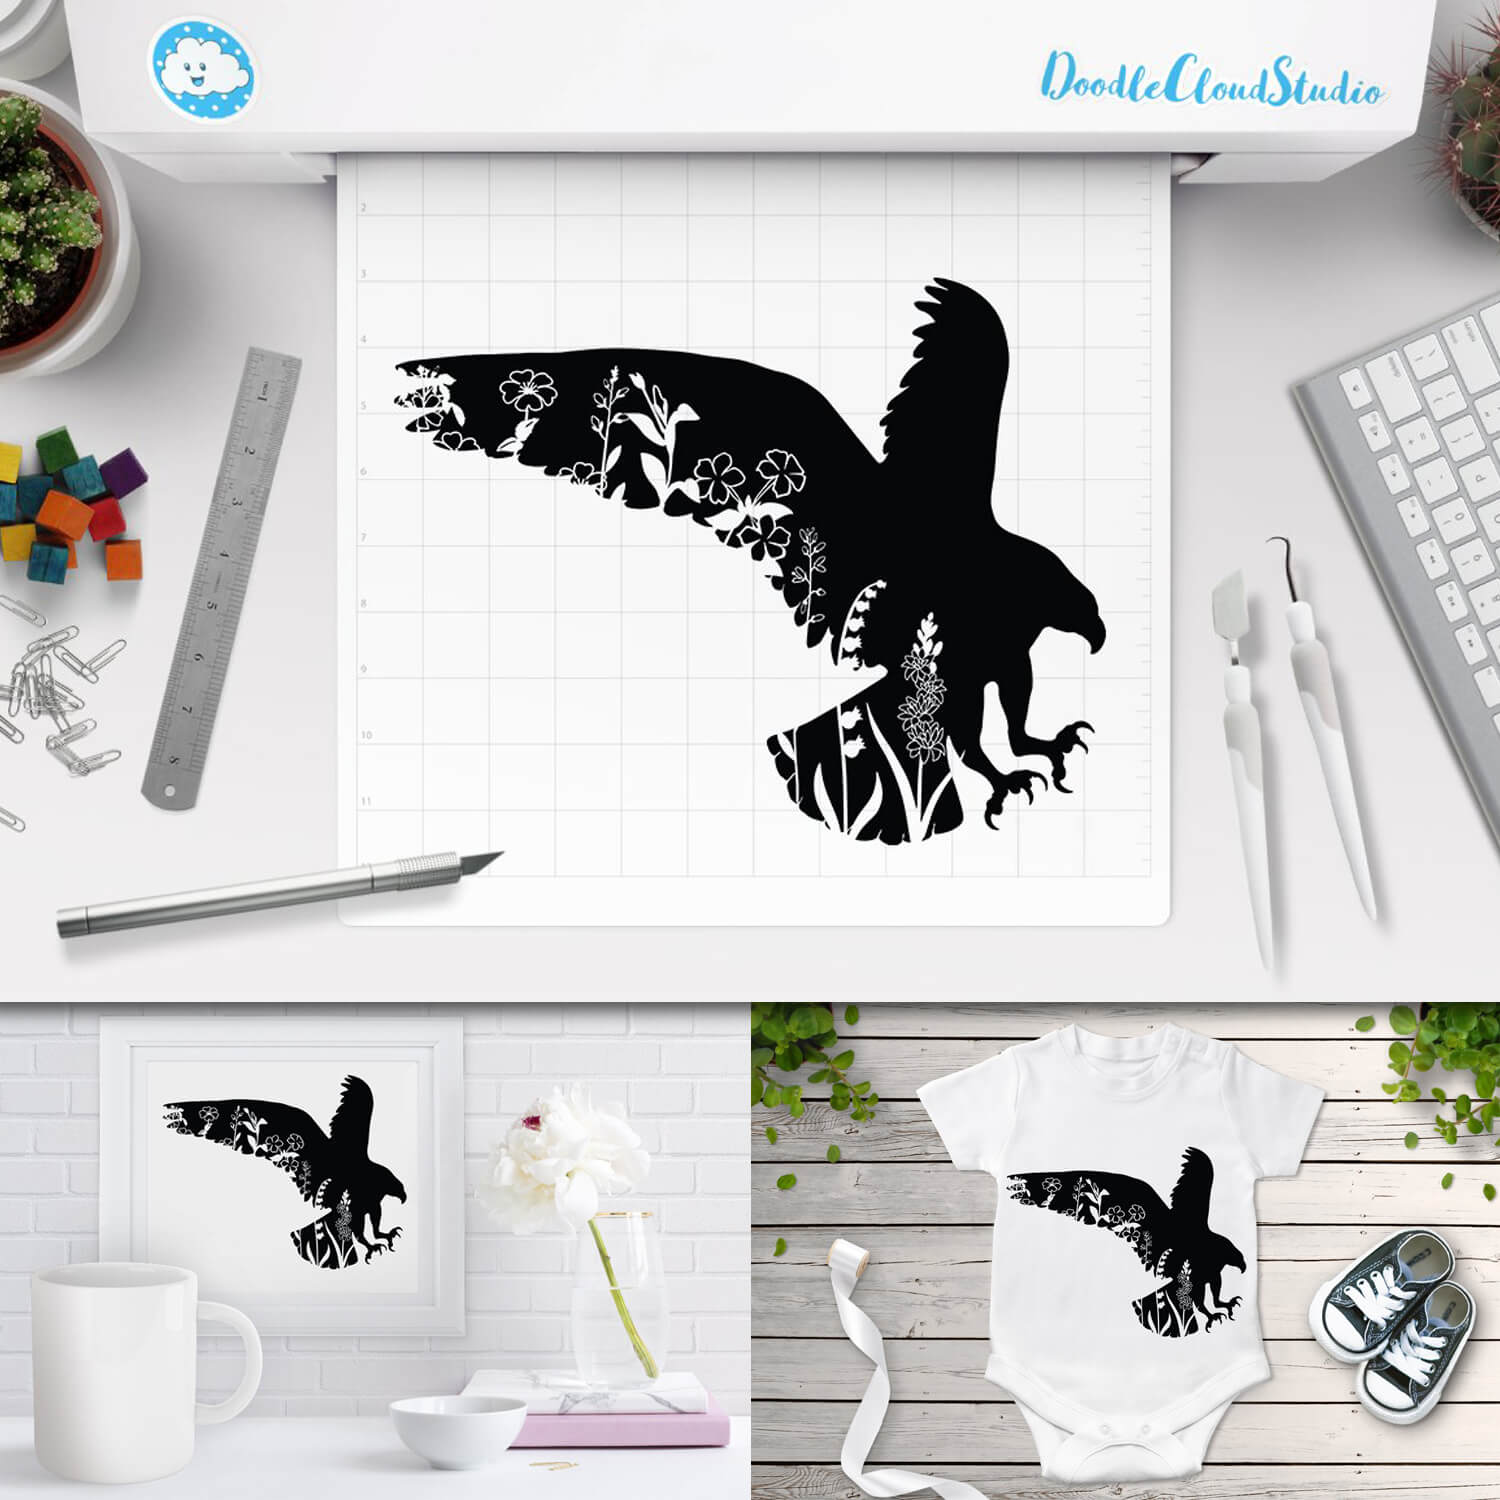 The design of the black floral eagle can be used on clothes, in the interior and at work.